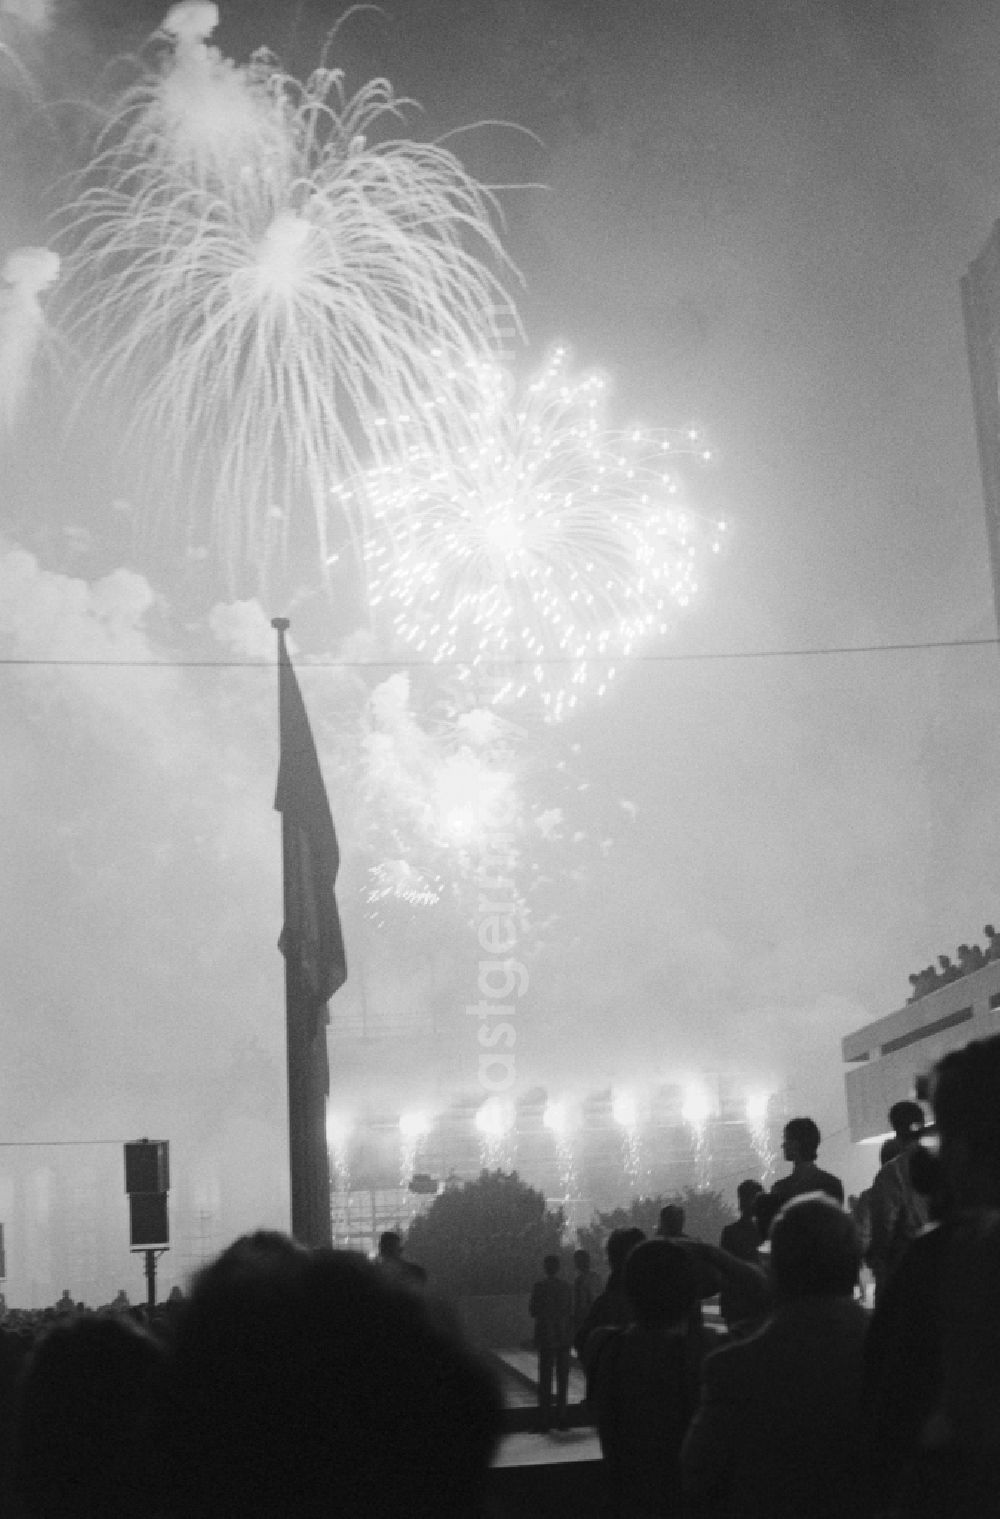 GDR photo archive: Berlin - Closing ceremony and fireworks at the Marx-Engels-Platz in the Lustgarten to Pfingsttreffen the FDJ in Berlin, the former capital of the GDR, the German Democratic Republic